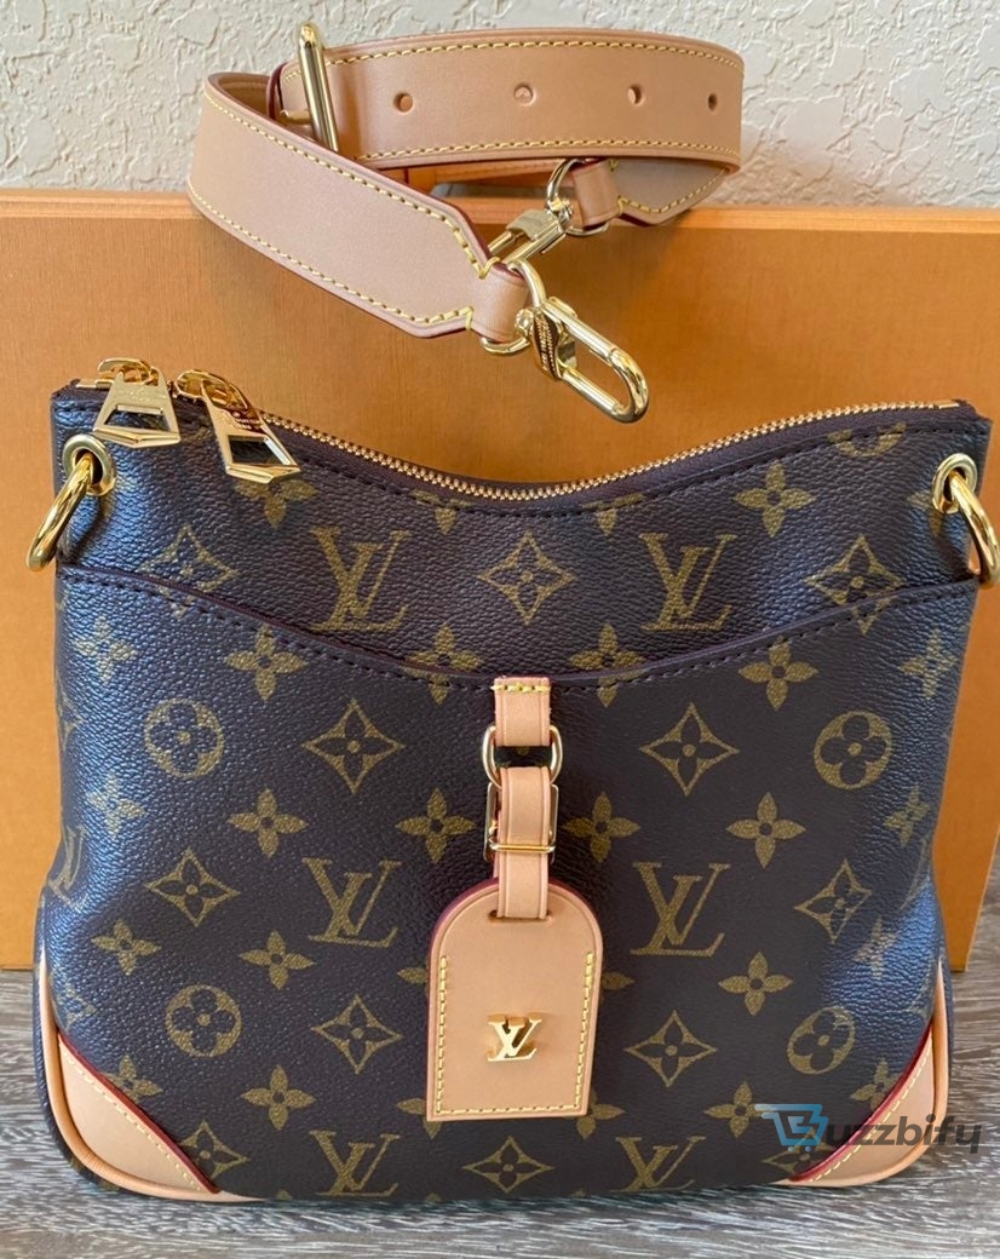 louis vuitton odeon pm monogram canvas natural for fallwinter womens handbags shoulder and crossbody bags 11in28cm lv m45354 2799 buzzbify 1 6